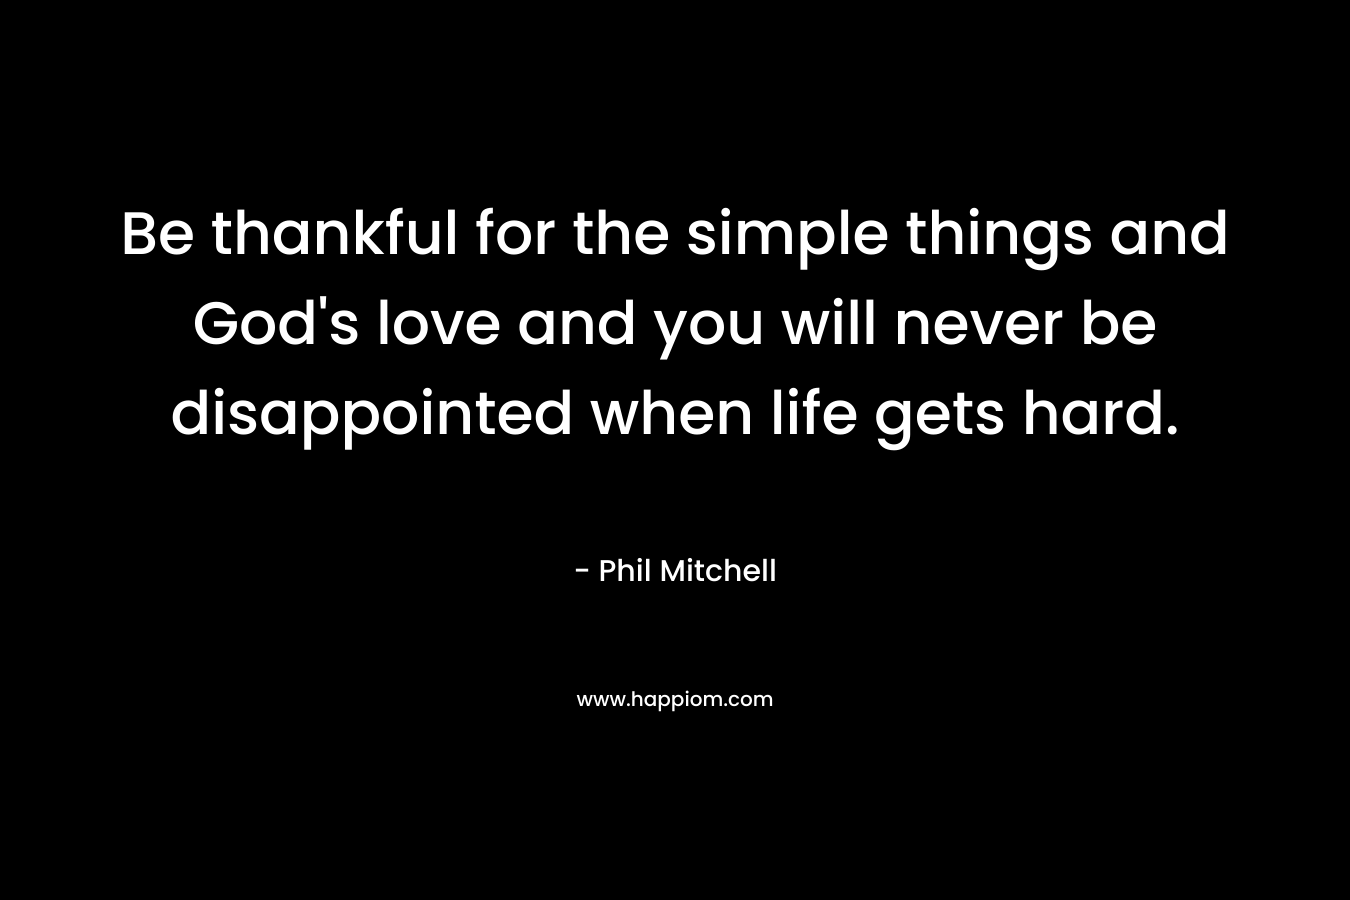 Be thankful for the simple things and God’s love and you will never be disappointed when life gets hard. – Phil Mitchell